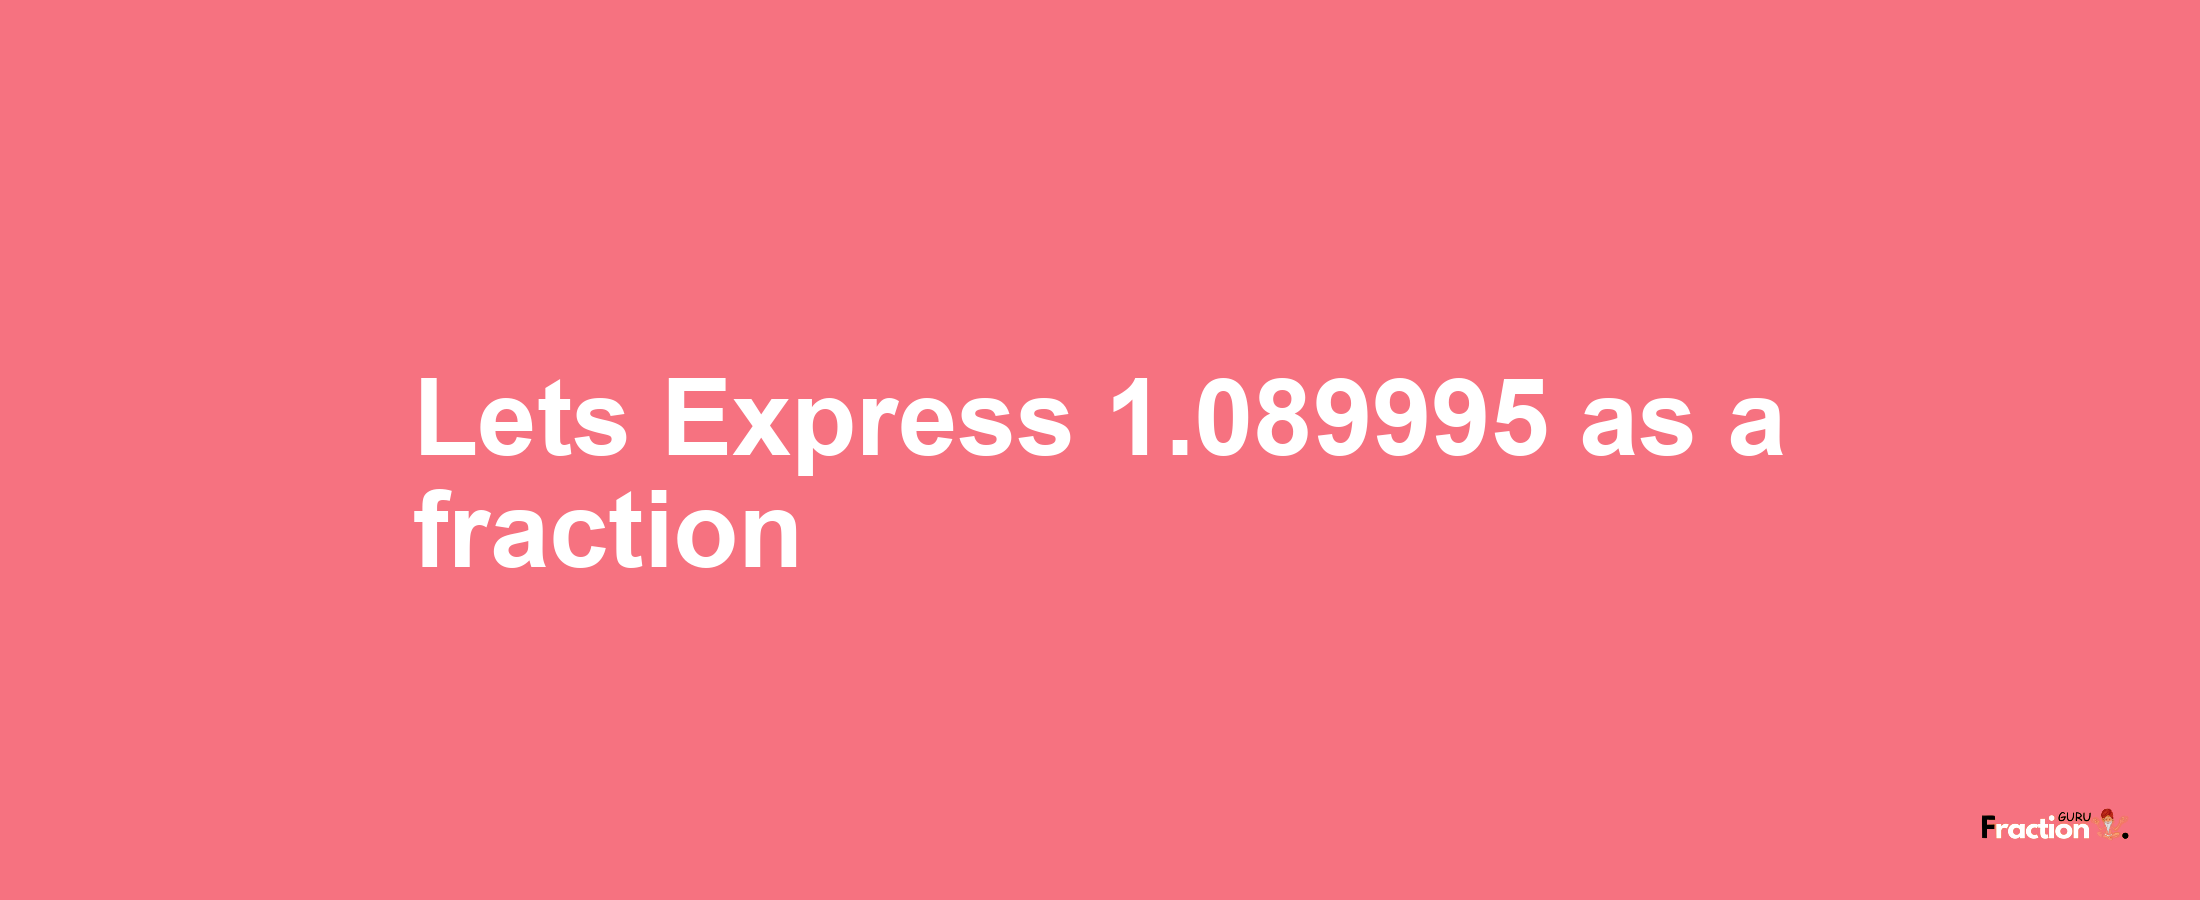 Lets Express 1.089995 as afraction